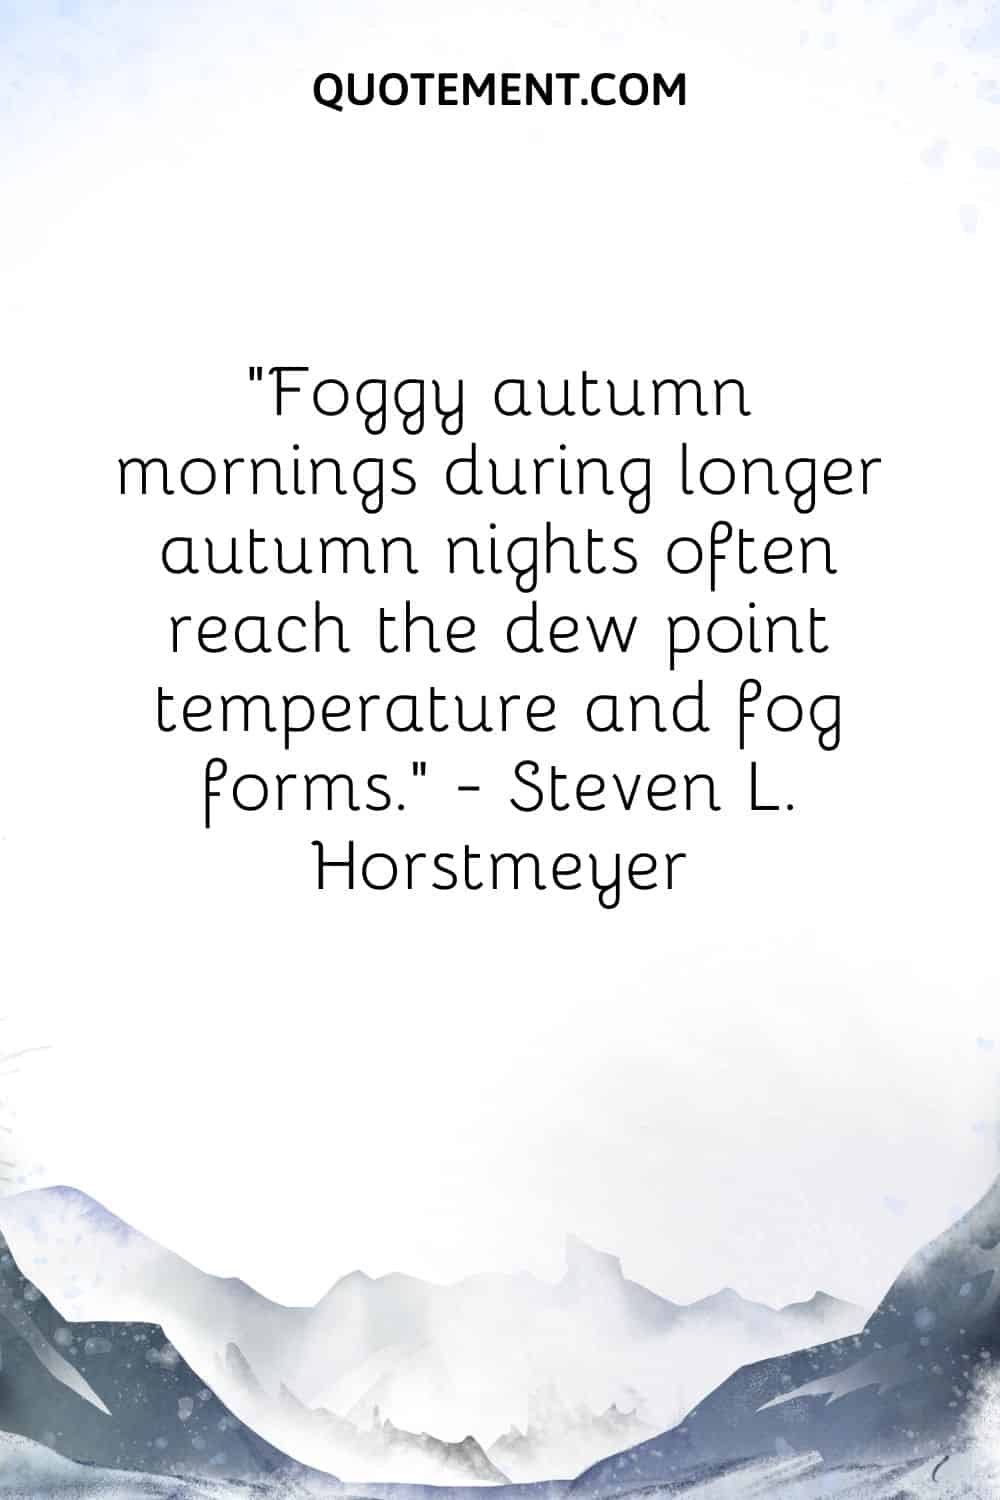 image of fog in the mountain representing foggy morning quote